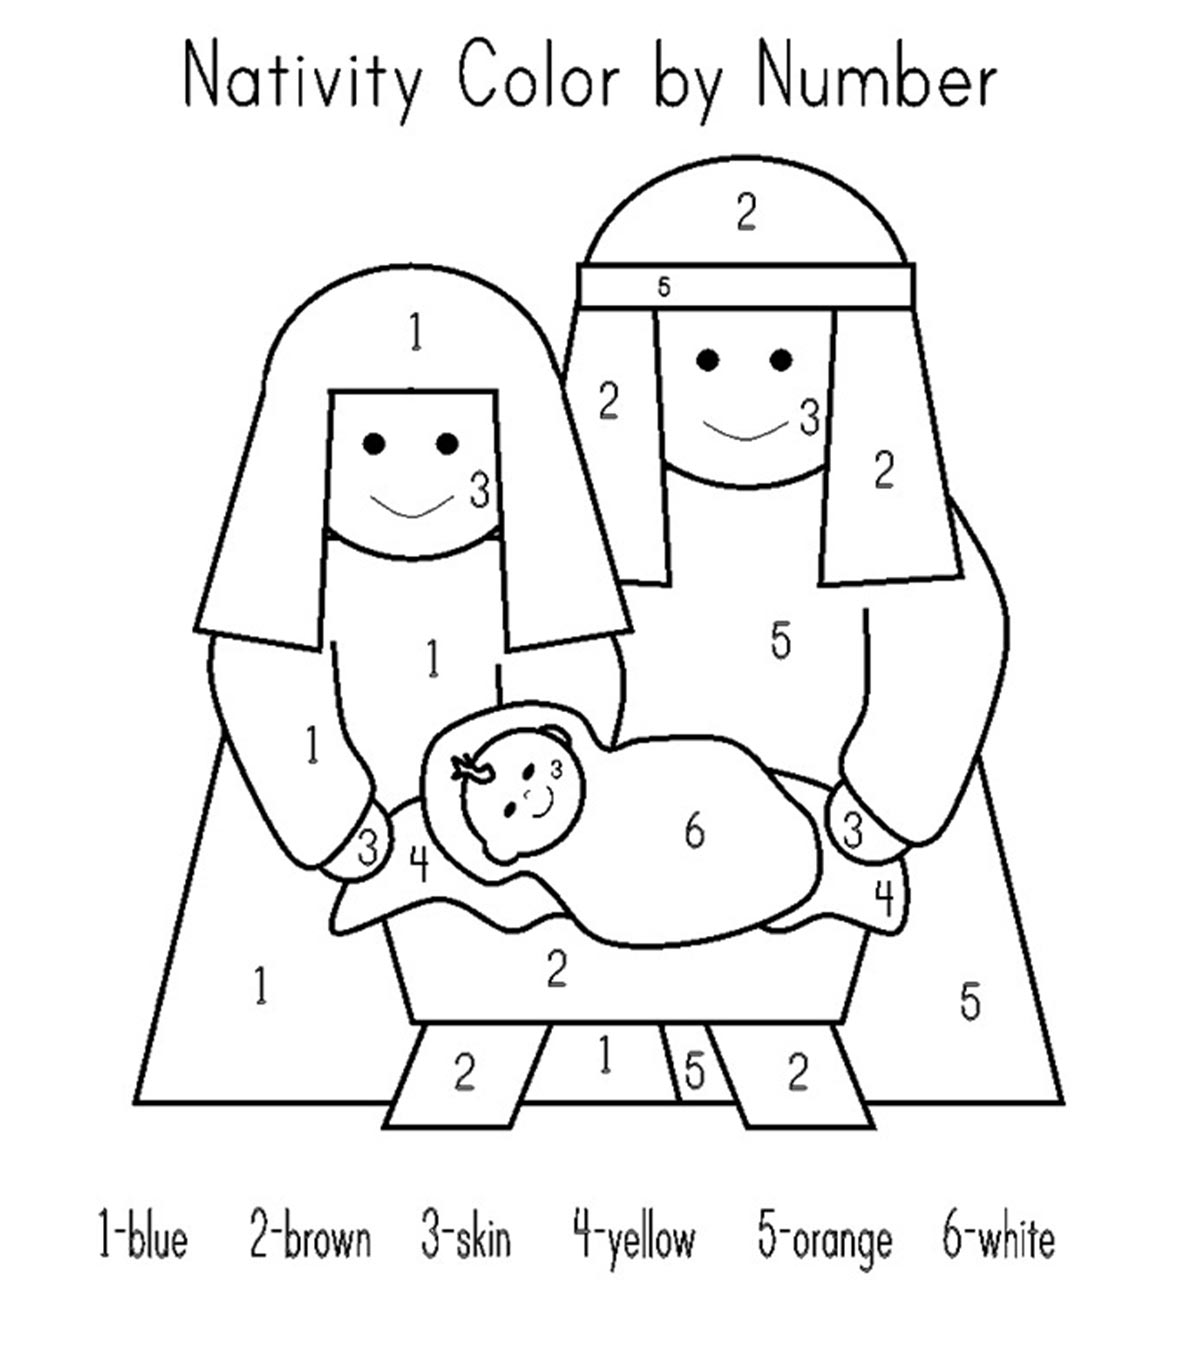 Nativity Coloring Pages For Your Toddlers_image